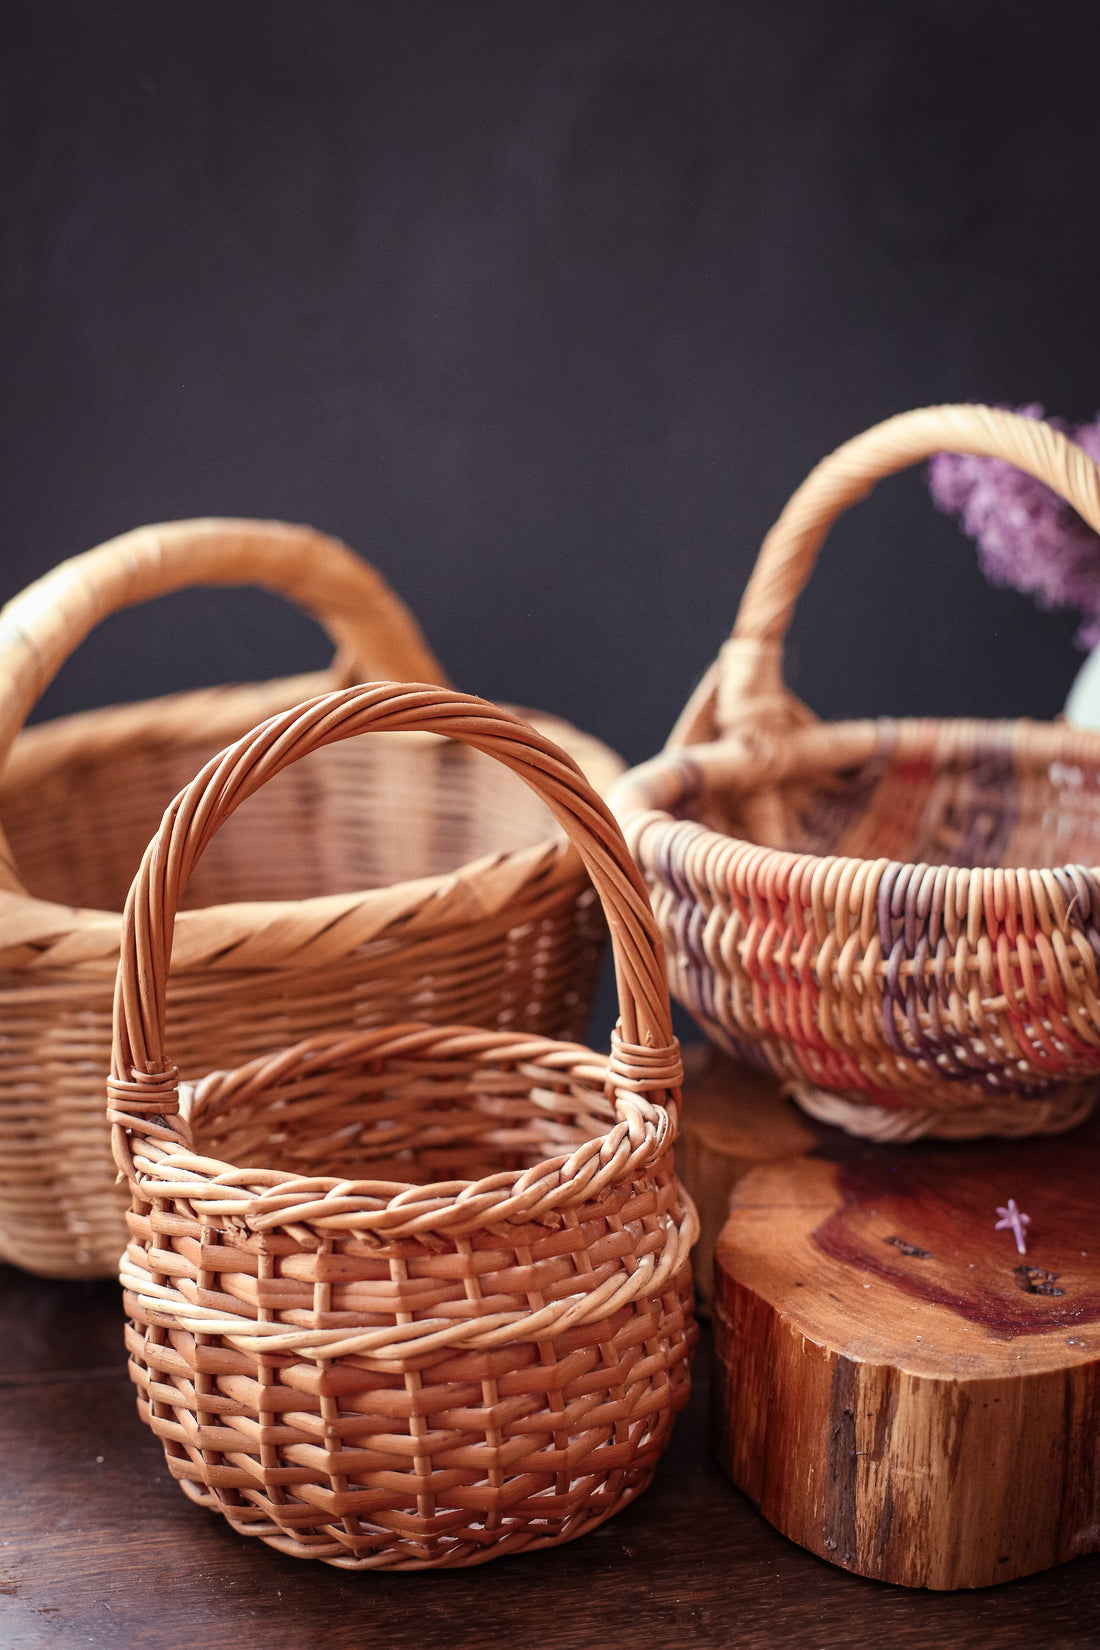 Craft & Function - The Art of Basketry